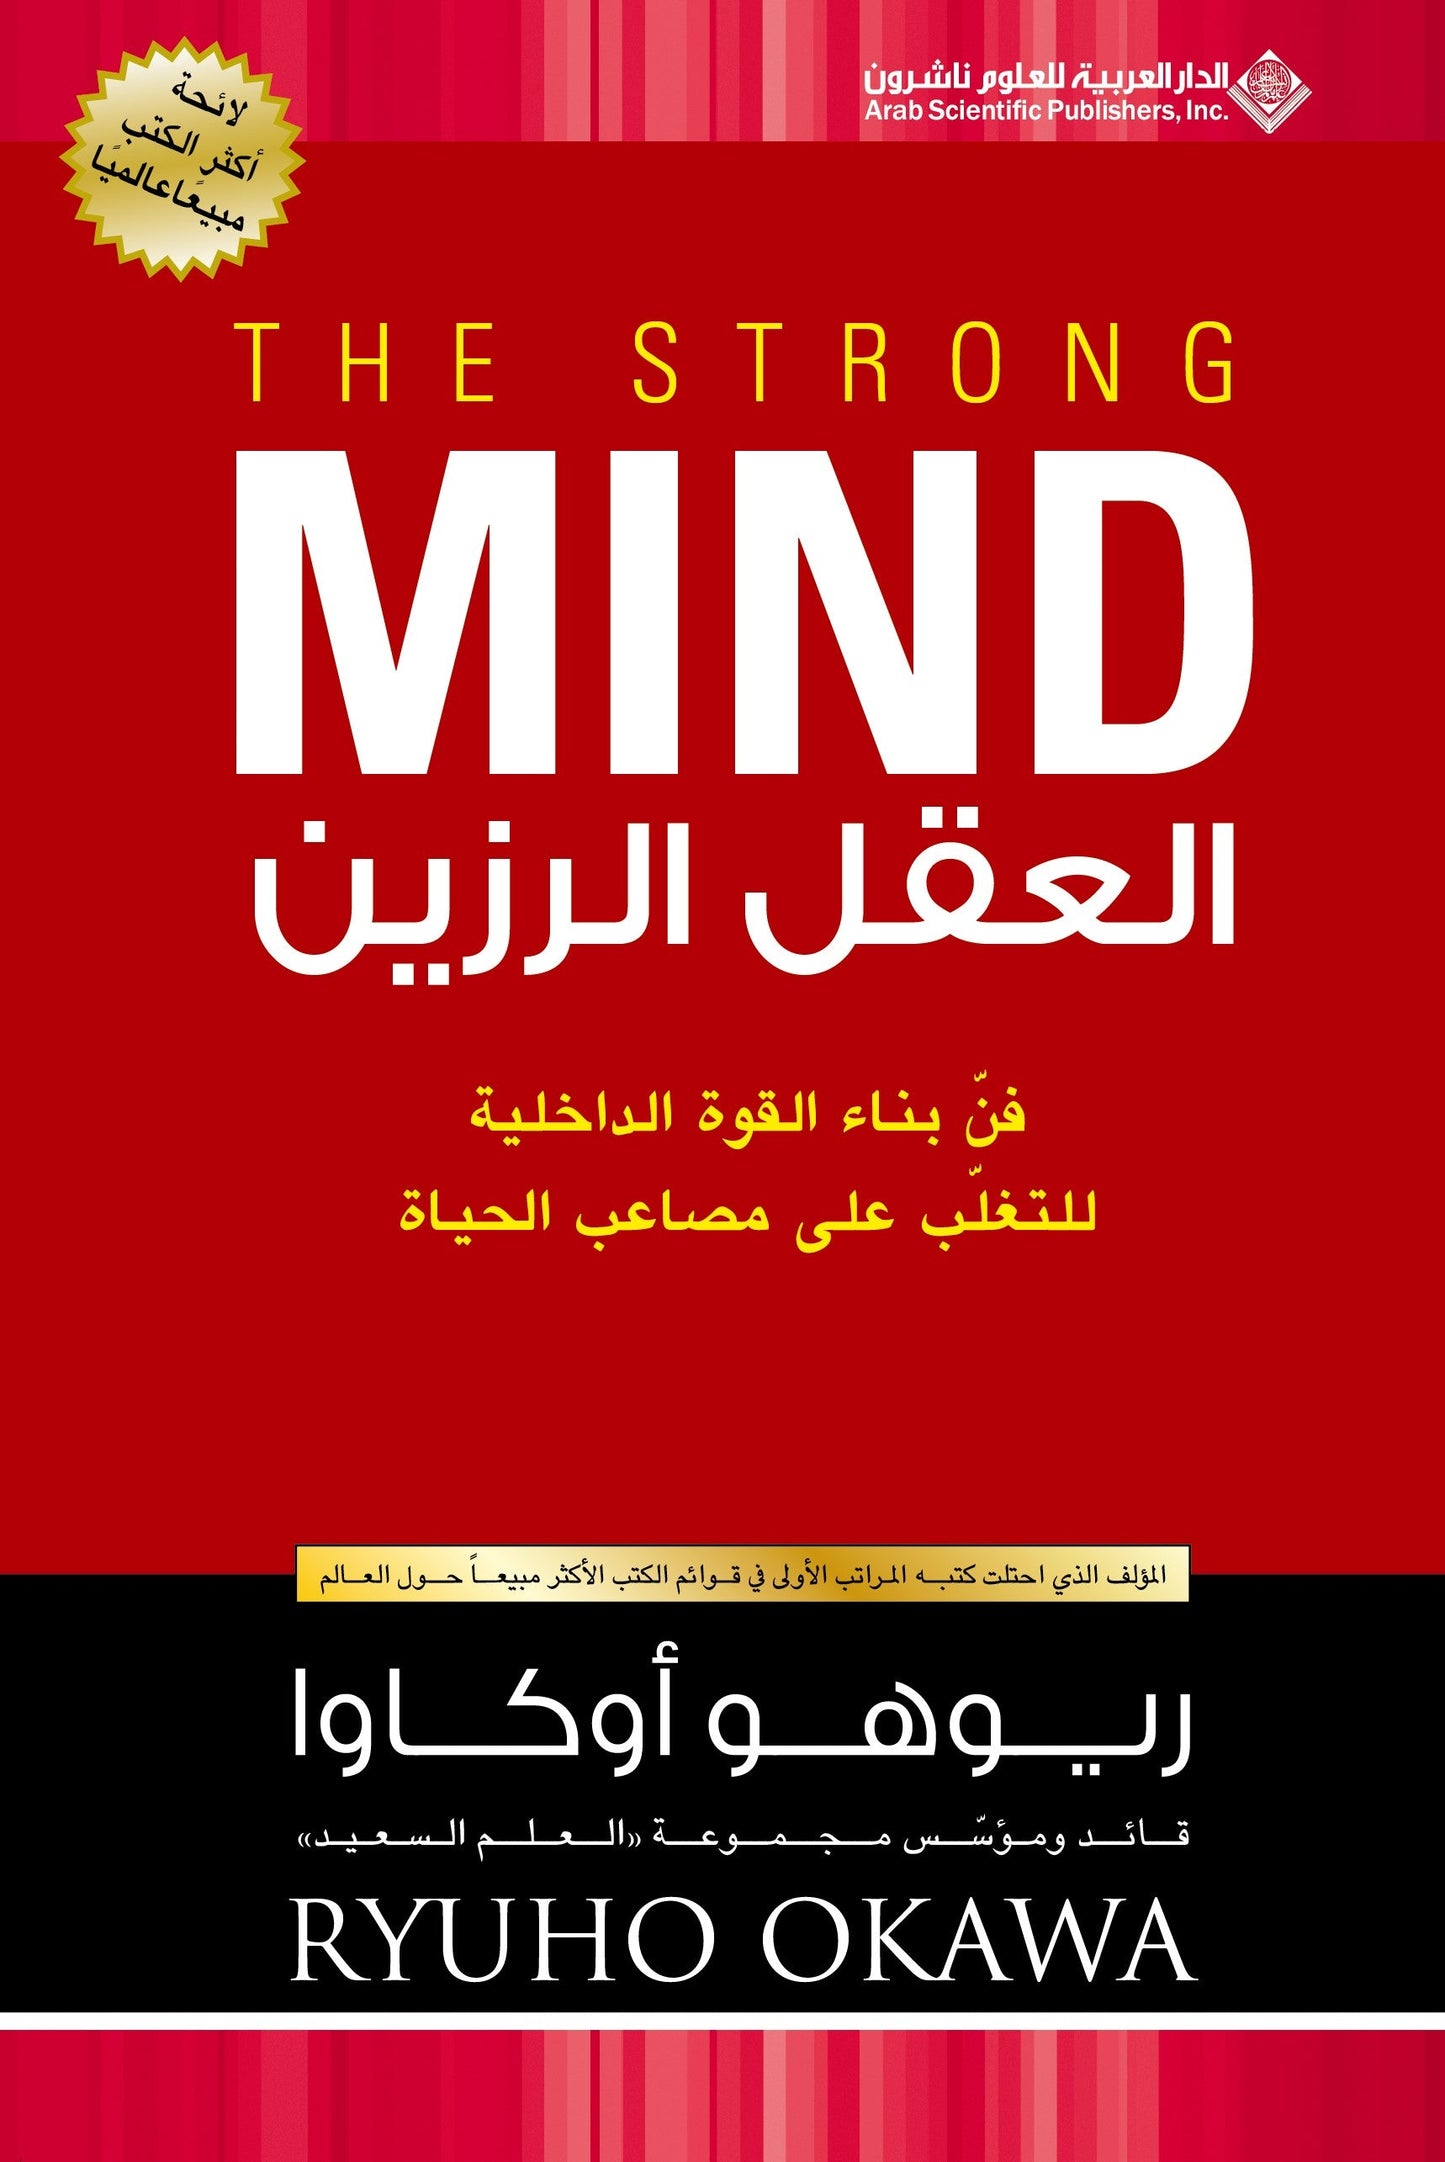 The Strong Mind : The Art of Building the Inner Strength to Overcome Life's Difficulties, Ryuho Okawa, Arabic - IRH Press International